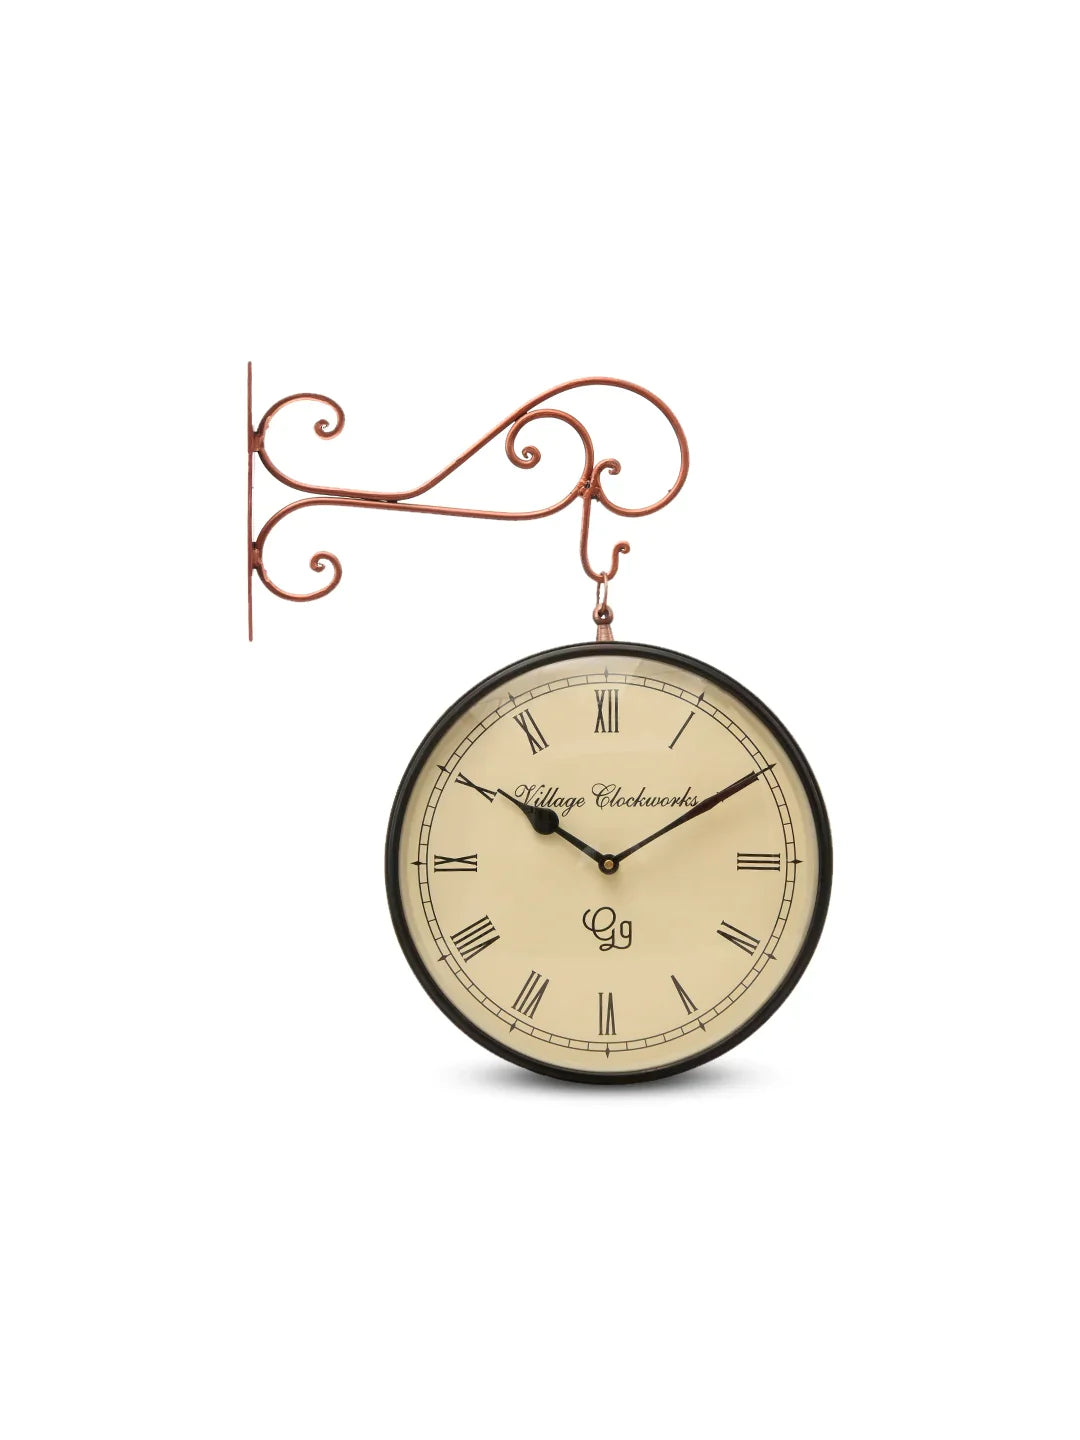 Metal Double Side Copper Jali 12 Inches Analog Station Clock